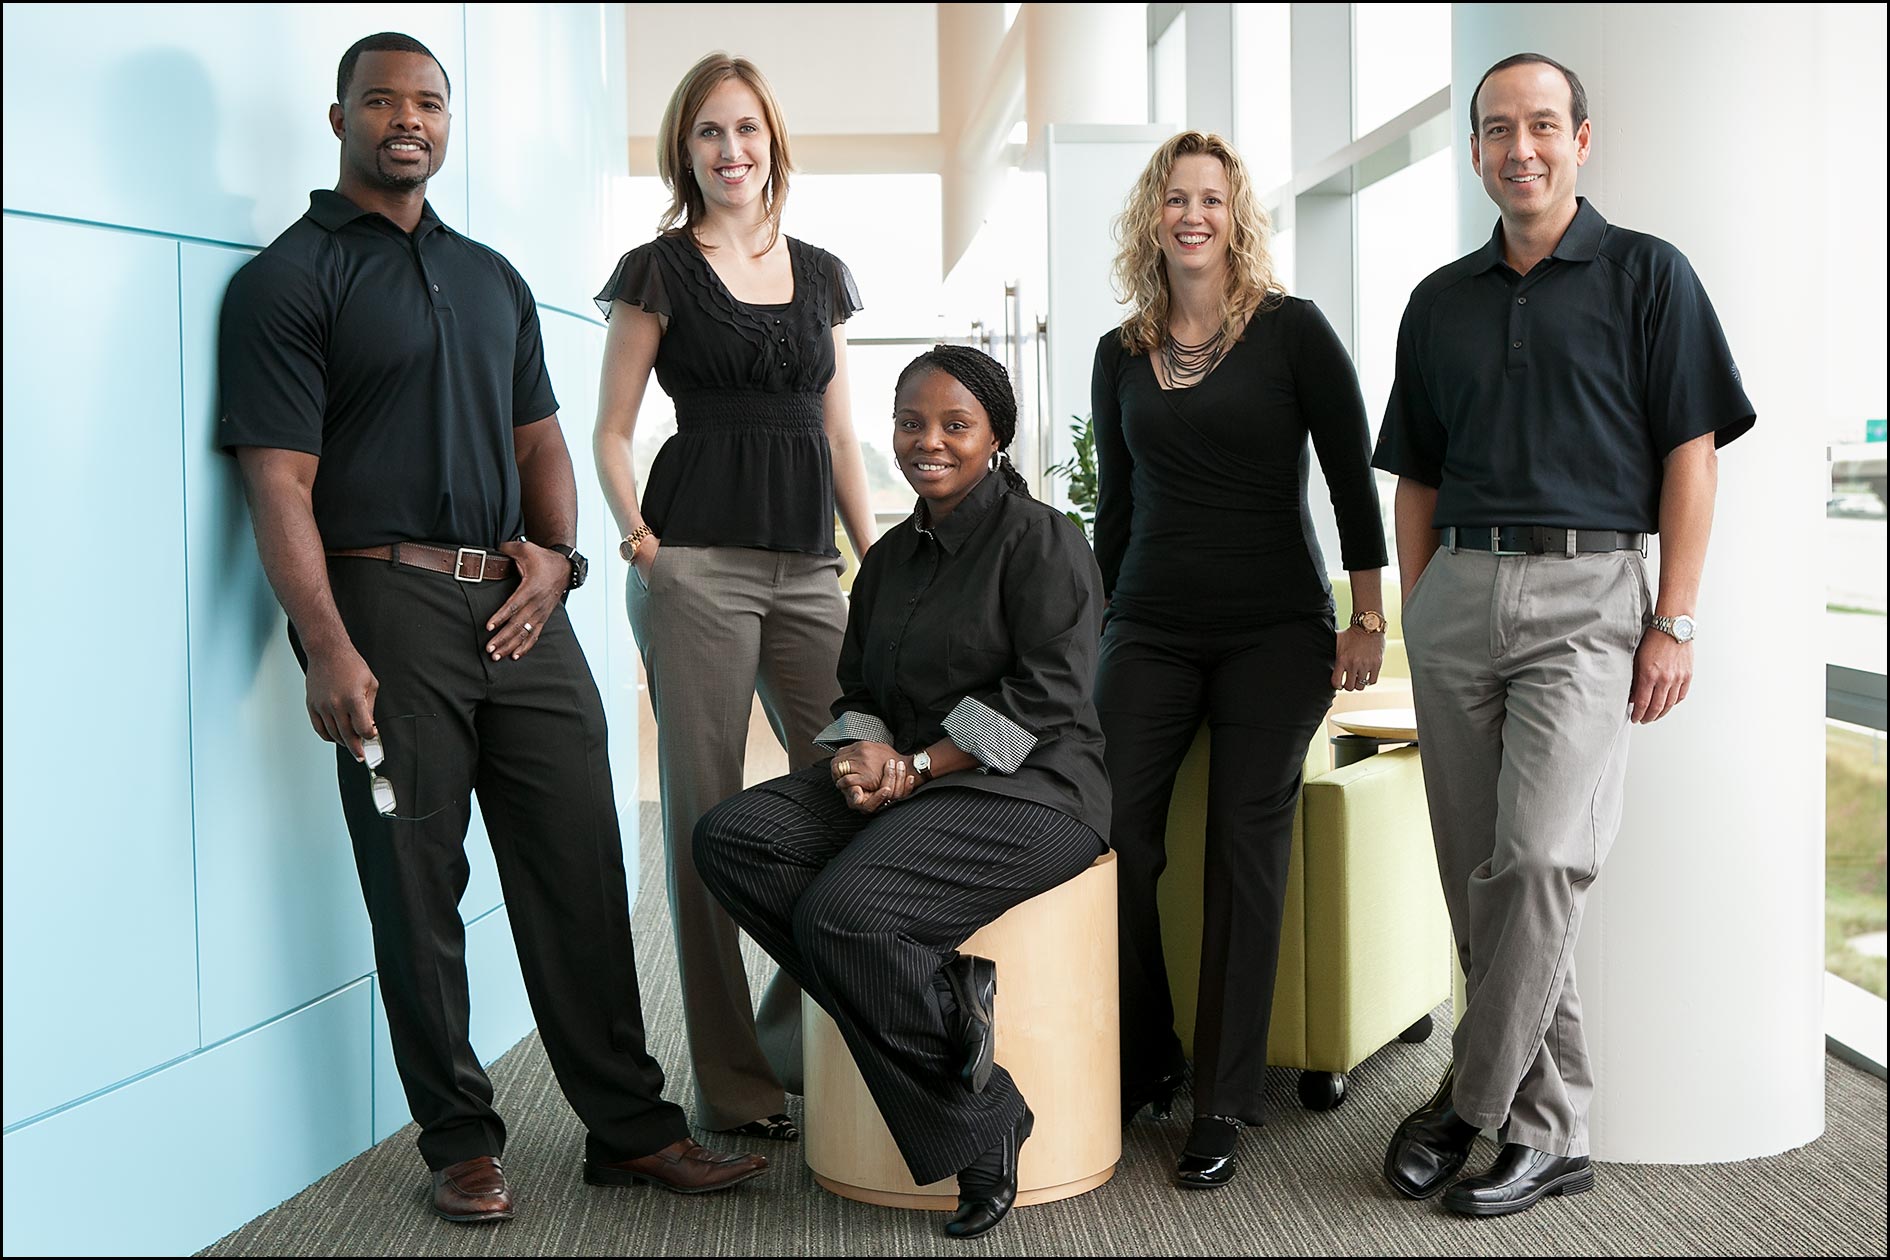 Business management team, in business casual dress, stands in an office atrium for a group photo.